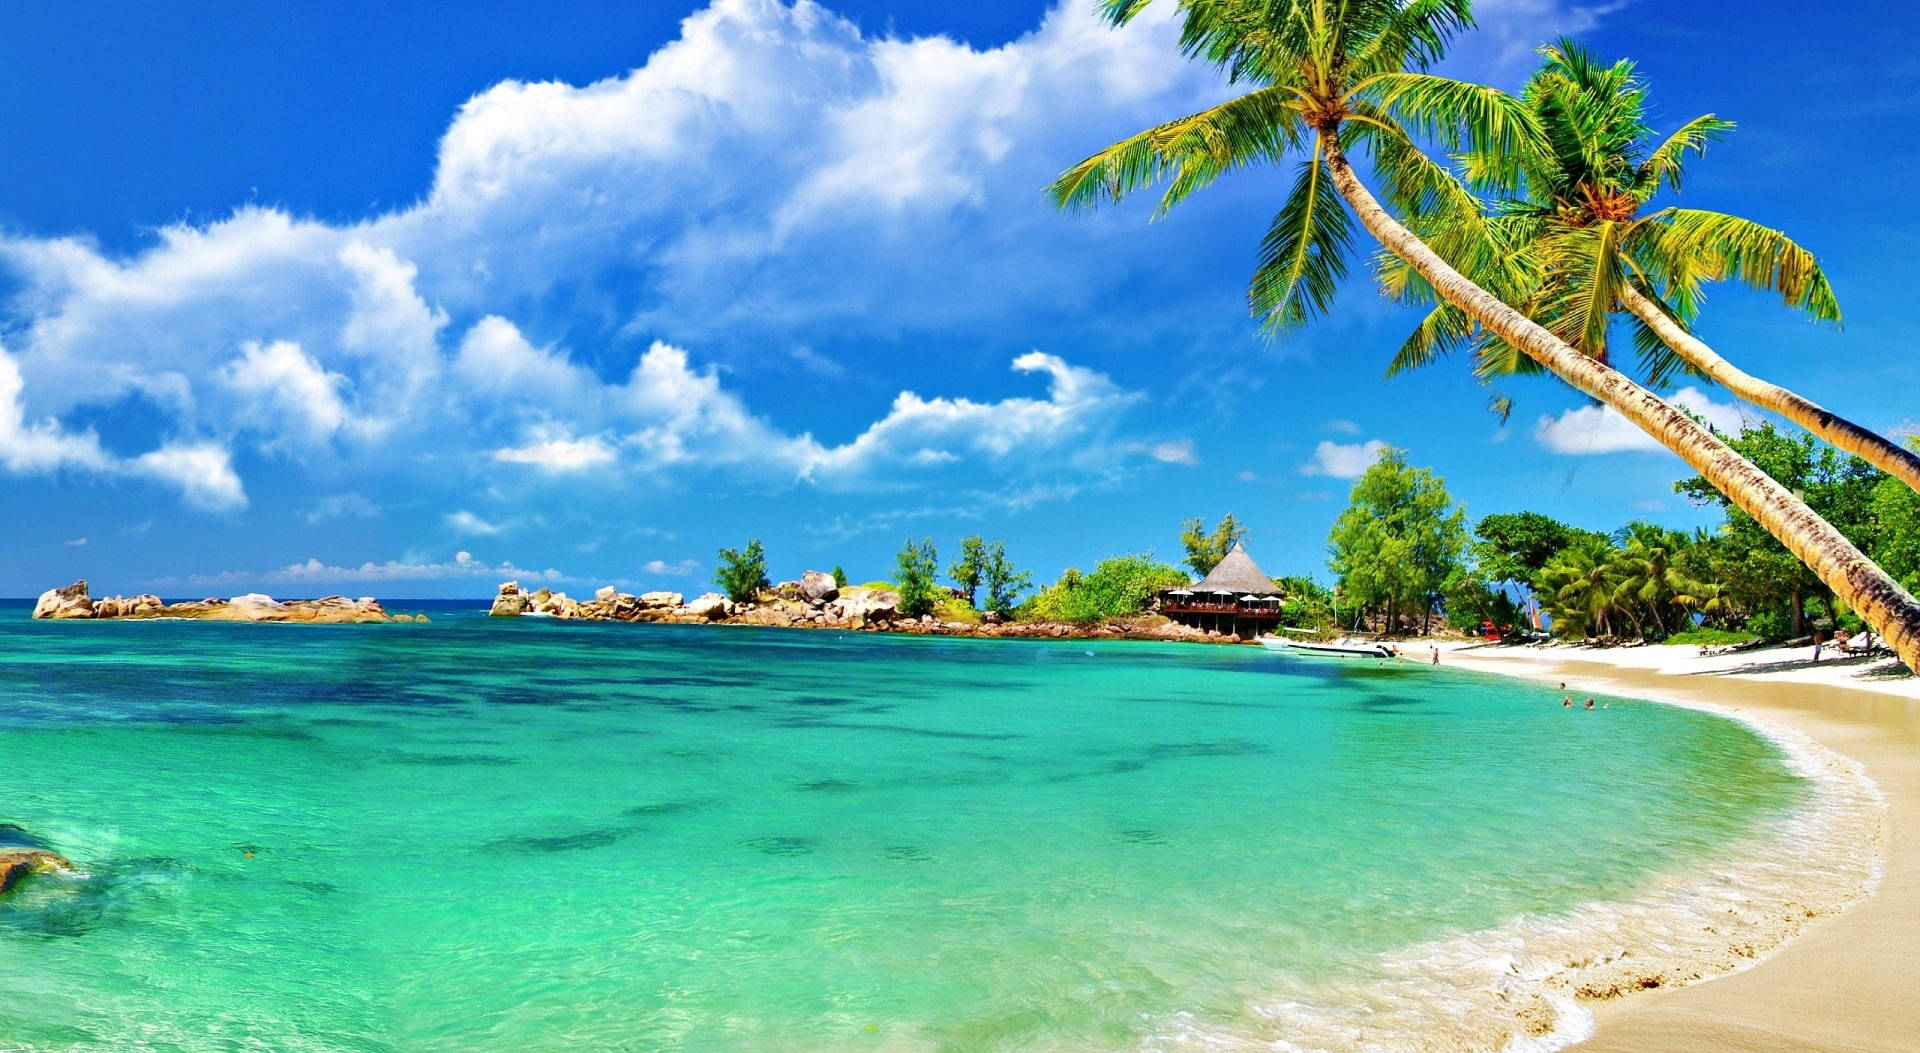 Awesome Hd Tropical Beach Picture